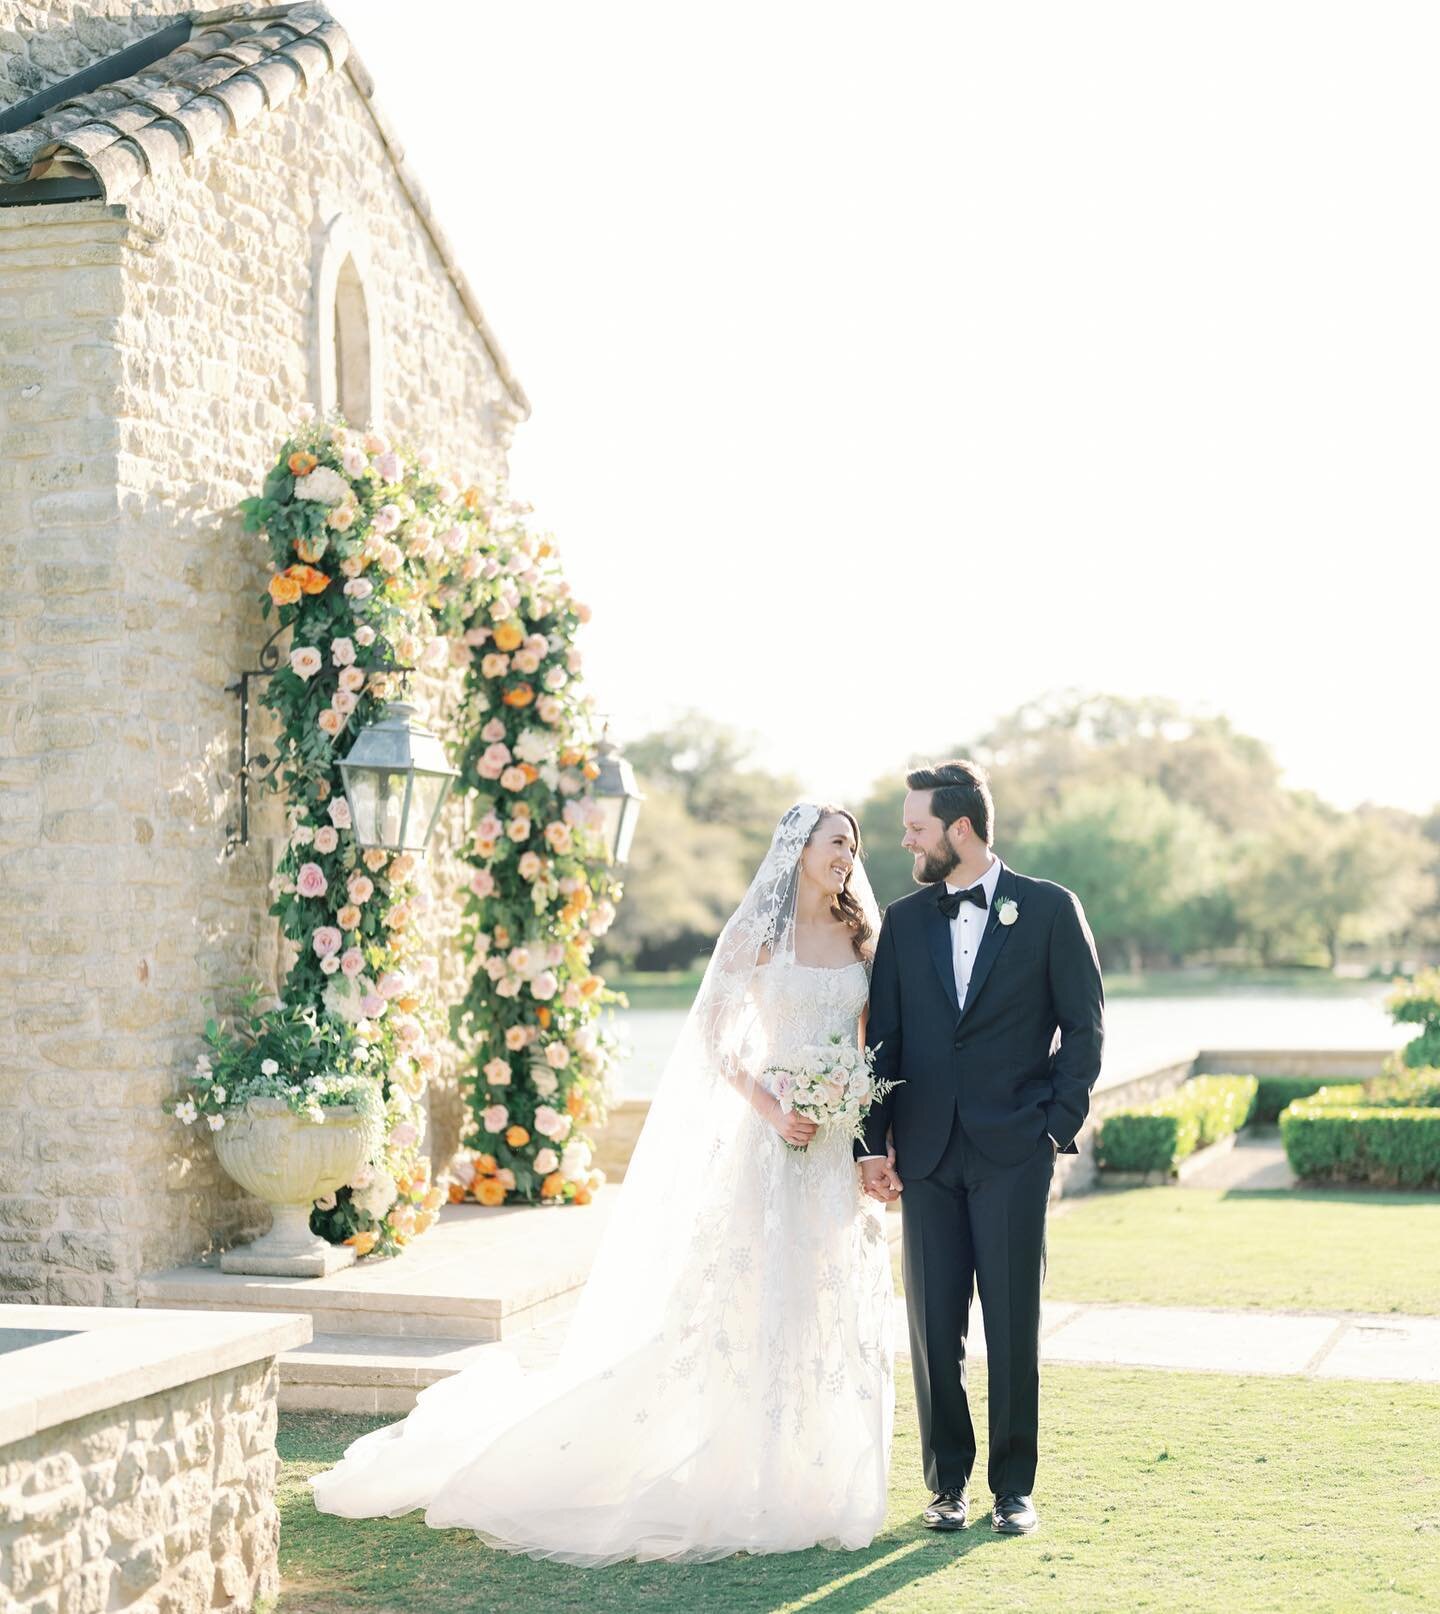 Jen x George&rsquo;s spring celebration in Houston was truly remarkable. Splashes of color from @bloominggallery accenting the natural beauty of @houstonoaks. And the amazing @sarah.belleevents x @belleevents!